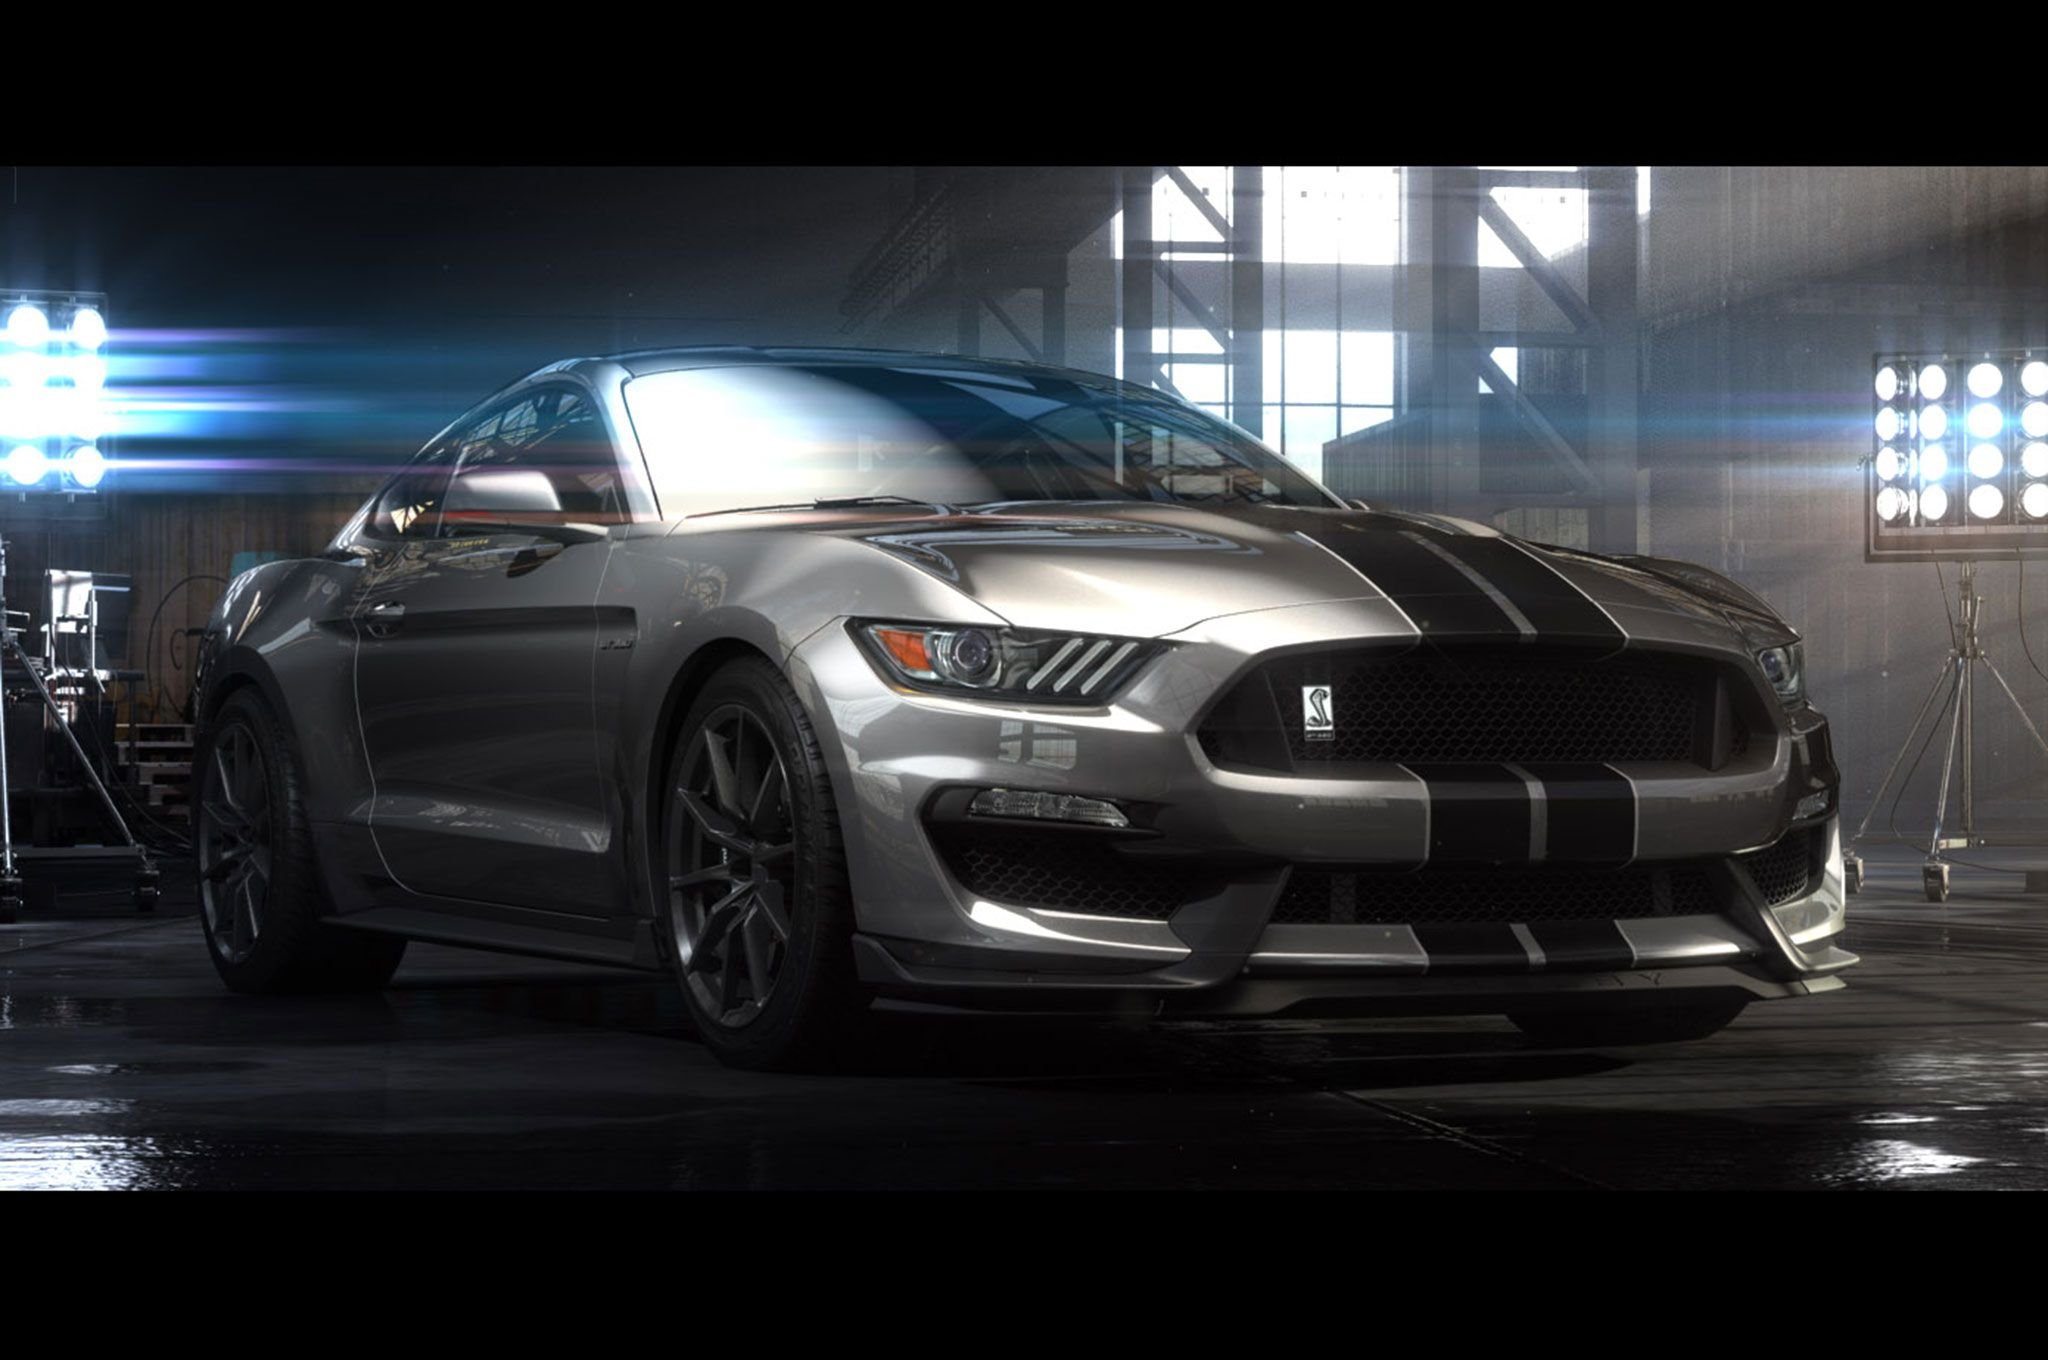 2015, Ford, Mustang, Shelby, Cobra, Gt, 350, Muscle, Supercar, Usa, 2048x1360 02 Wallpaper